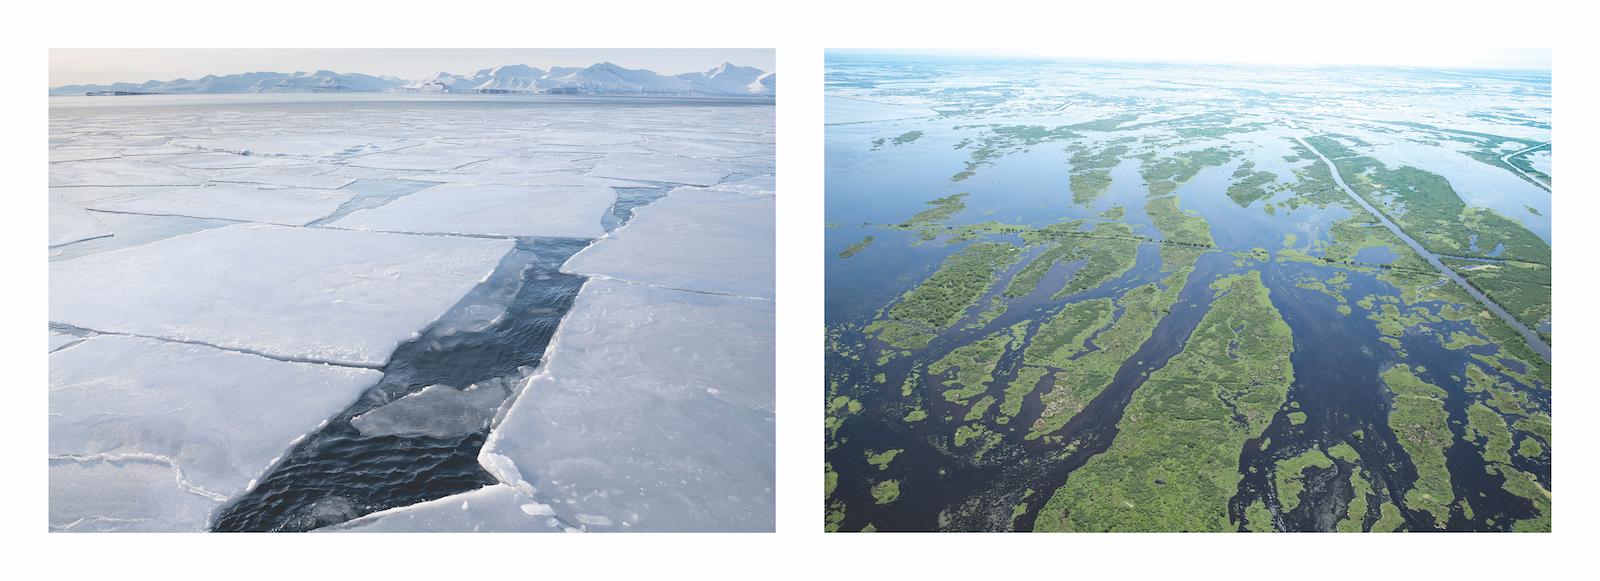 Left: Tina Freeman, Sea ice breaking up in late winter.  Right: Tina Freeman, Louisiana wetlands southeast of New Orleans on the east side of the river, south of the Caernarvon diversion.